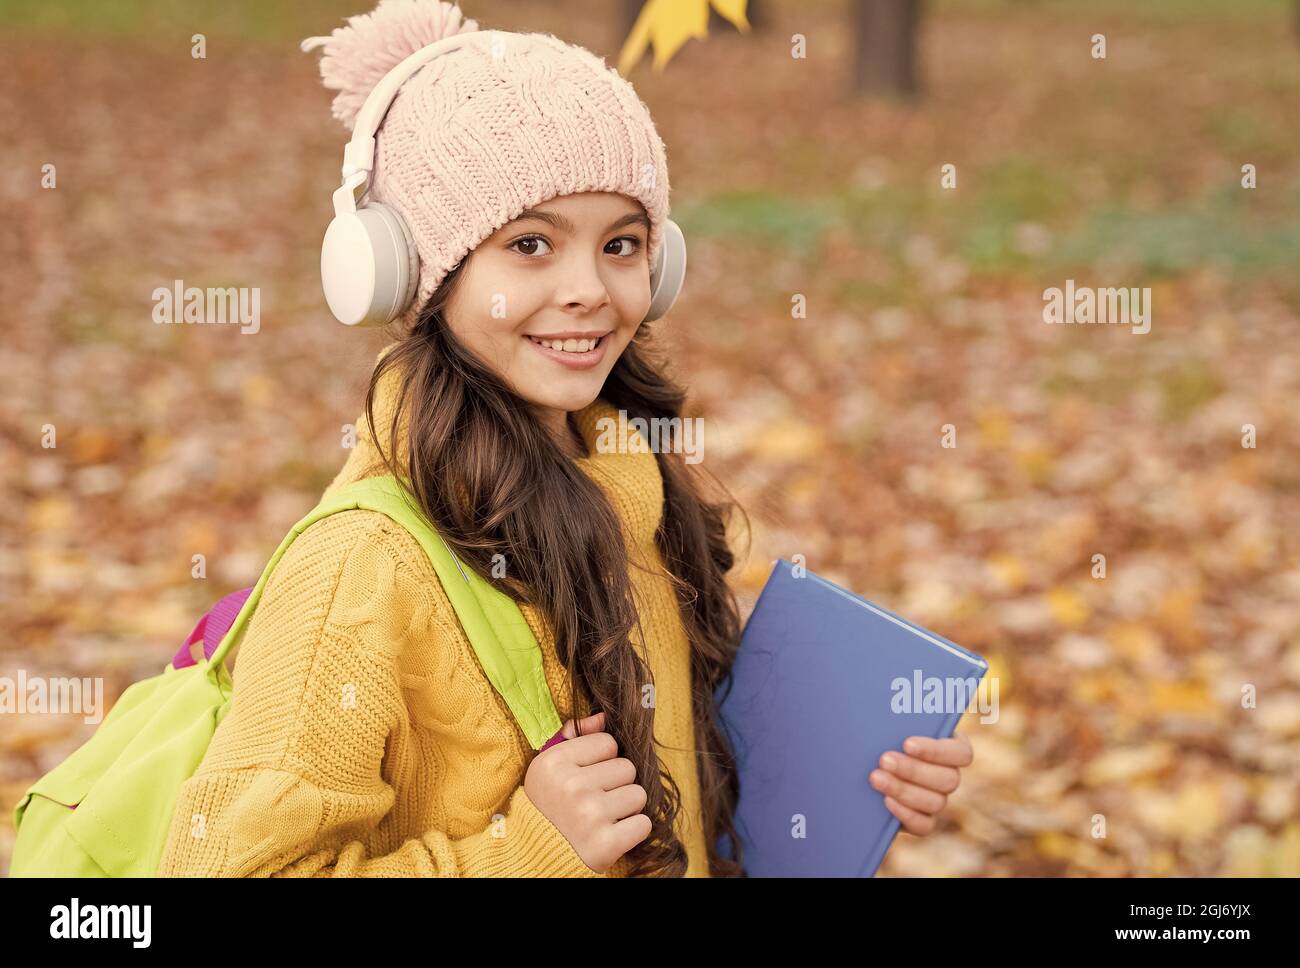 pupil in earpieces hold book while walking in park, education Stock Photo